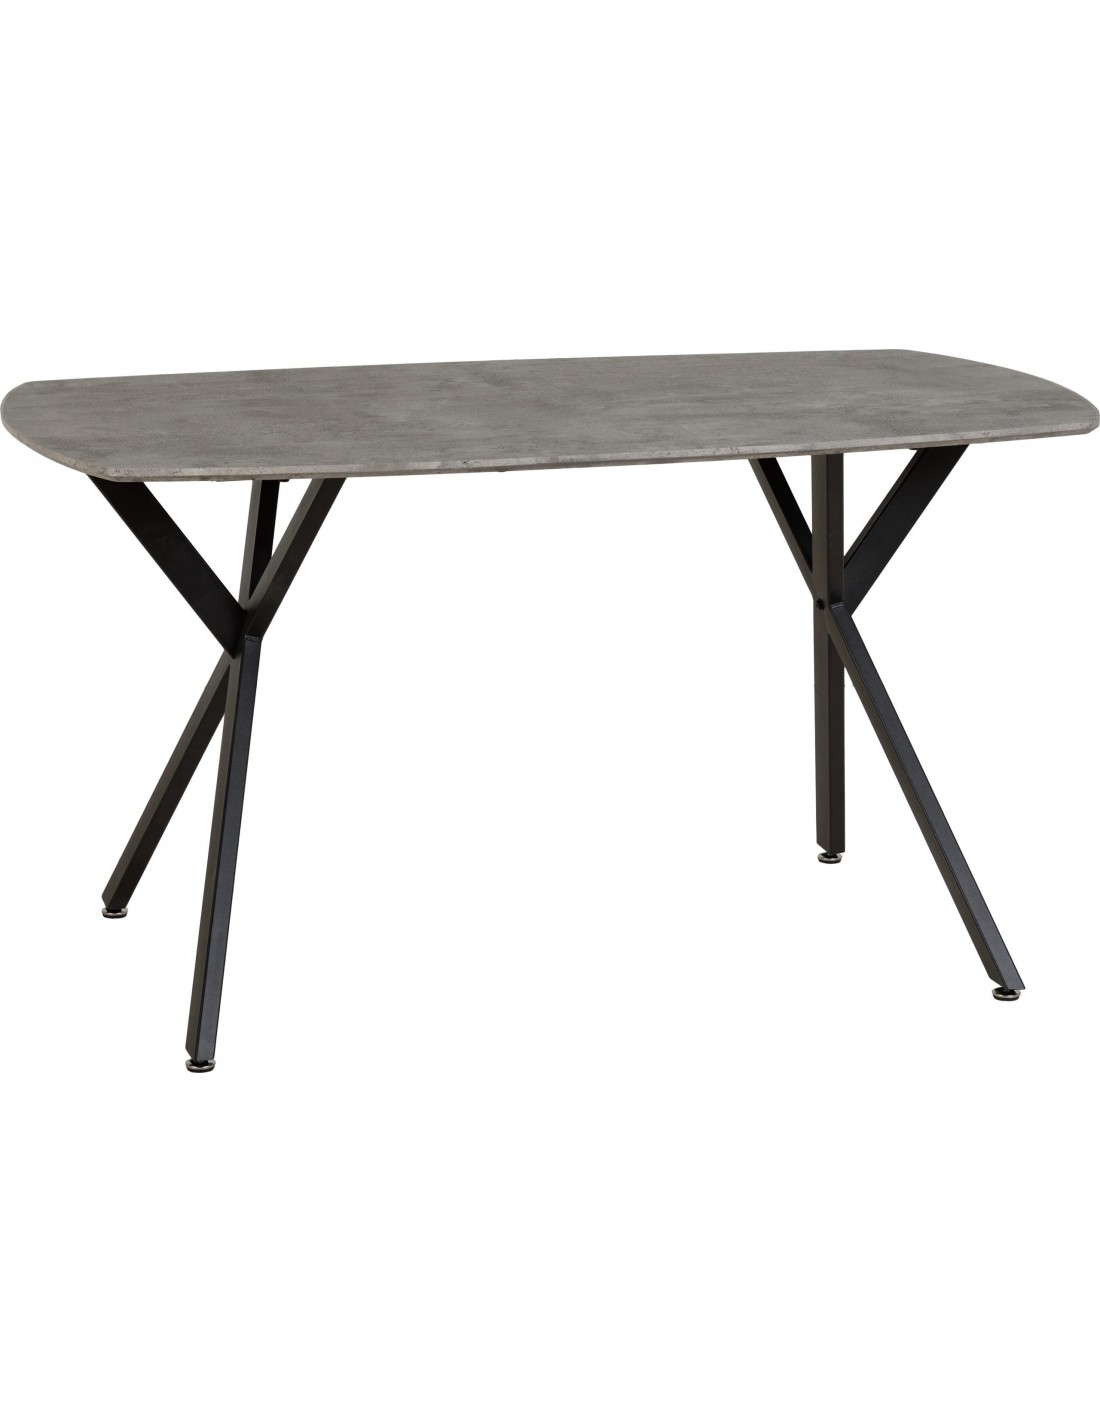 Athens Rectangular Dining Table Concrete Effect 